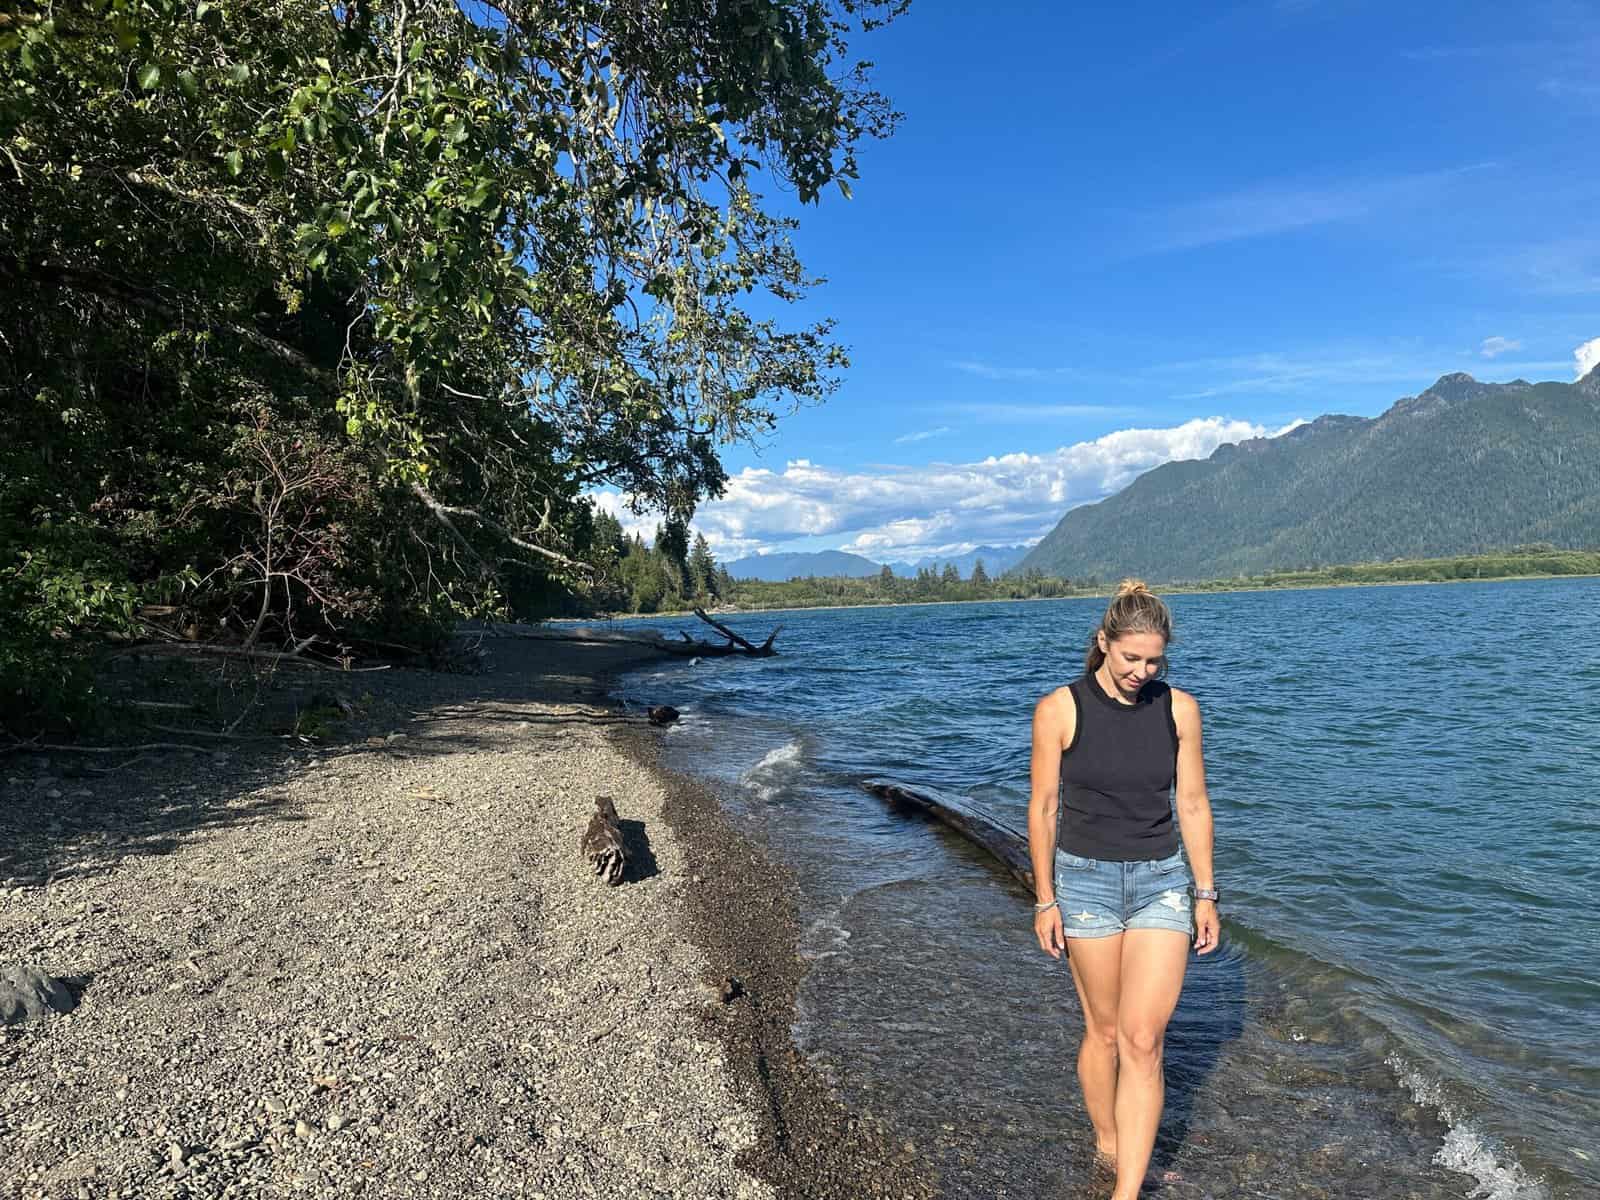 Alice Ford strolls along the shore of Lake Quinault during the final day of her 4-day itinerary for Olympic National Park with deciduous trees around her and mountain views across the water